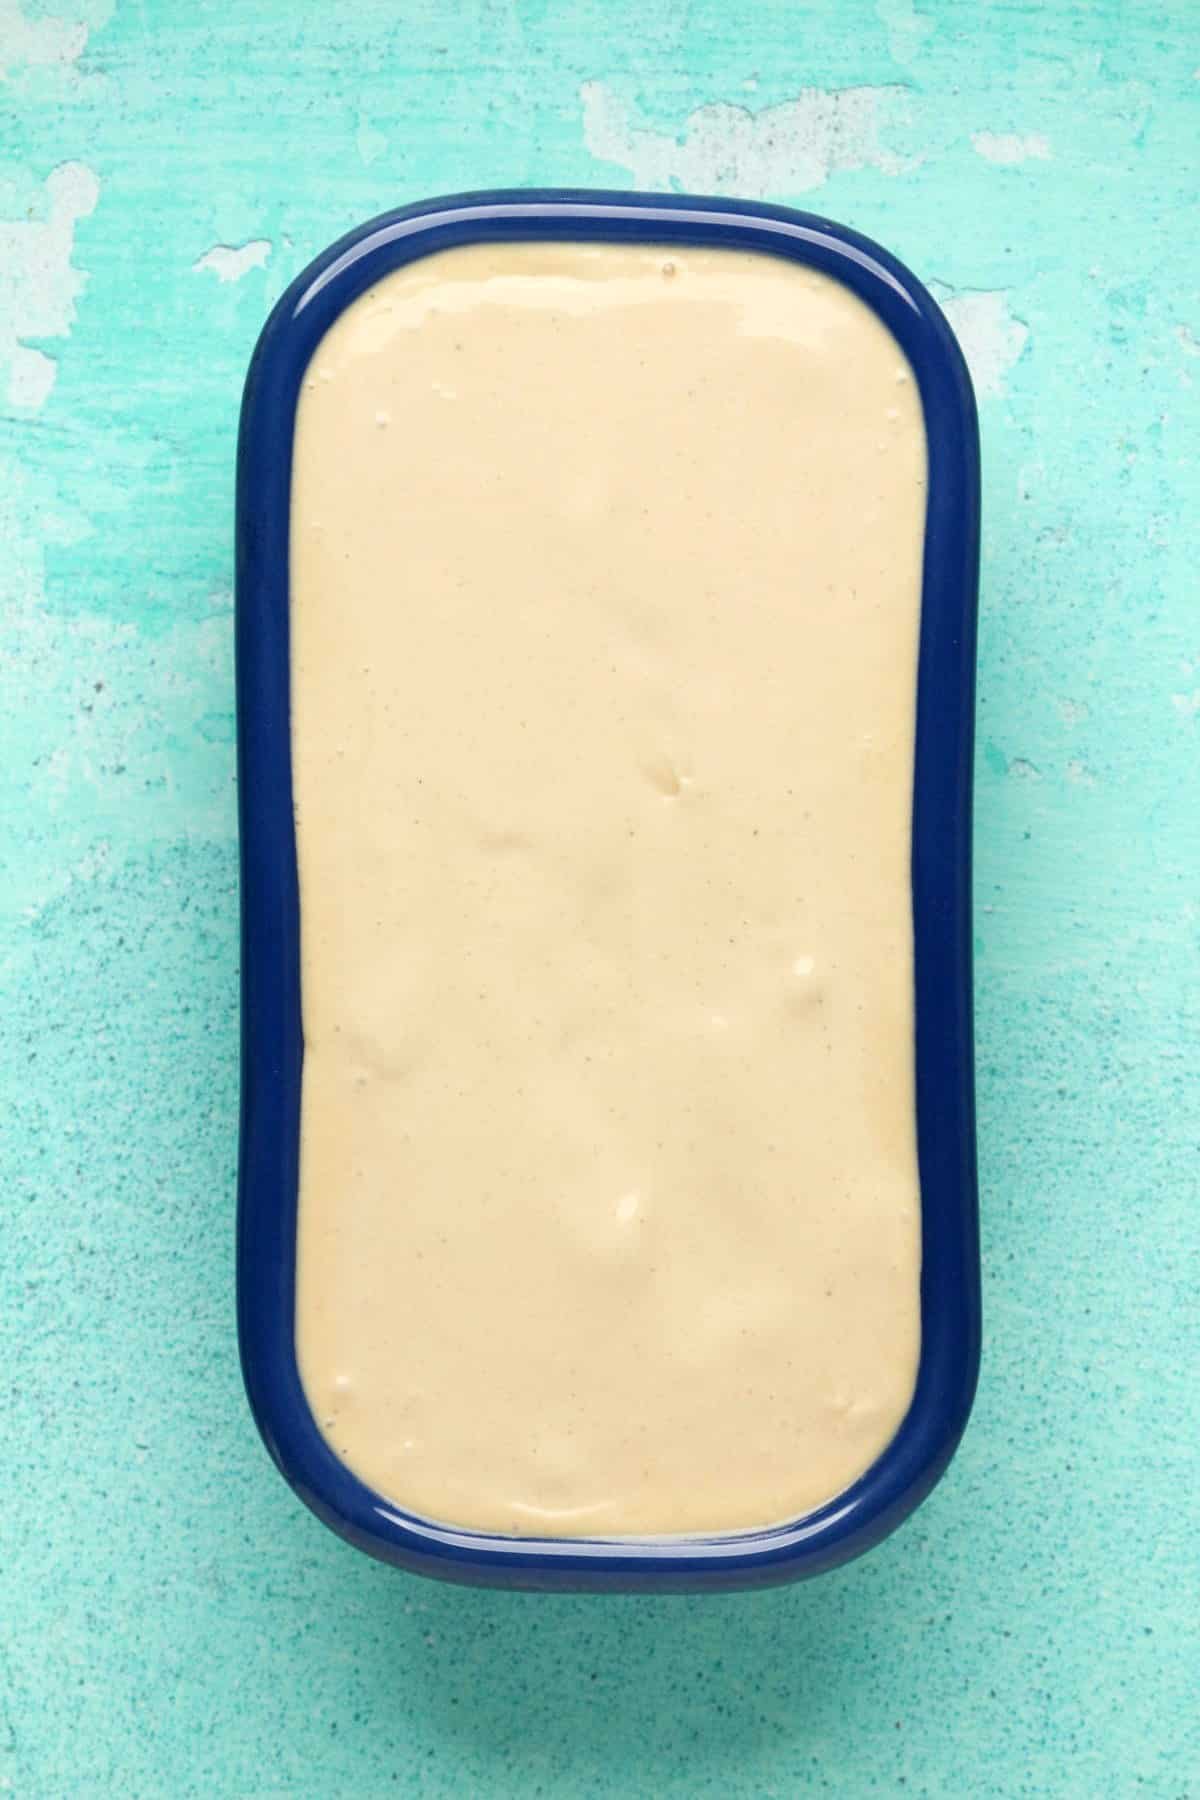 Ice cream mix in a blue loaf pan.